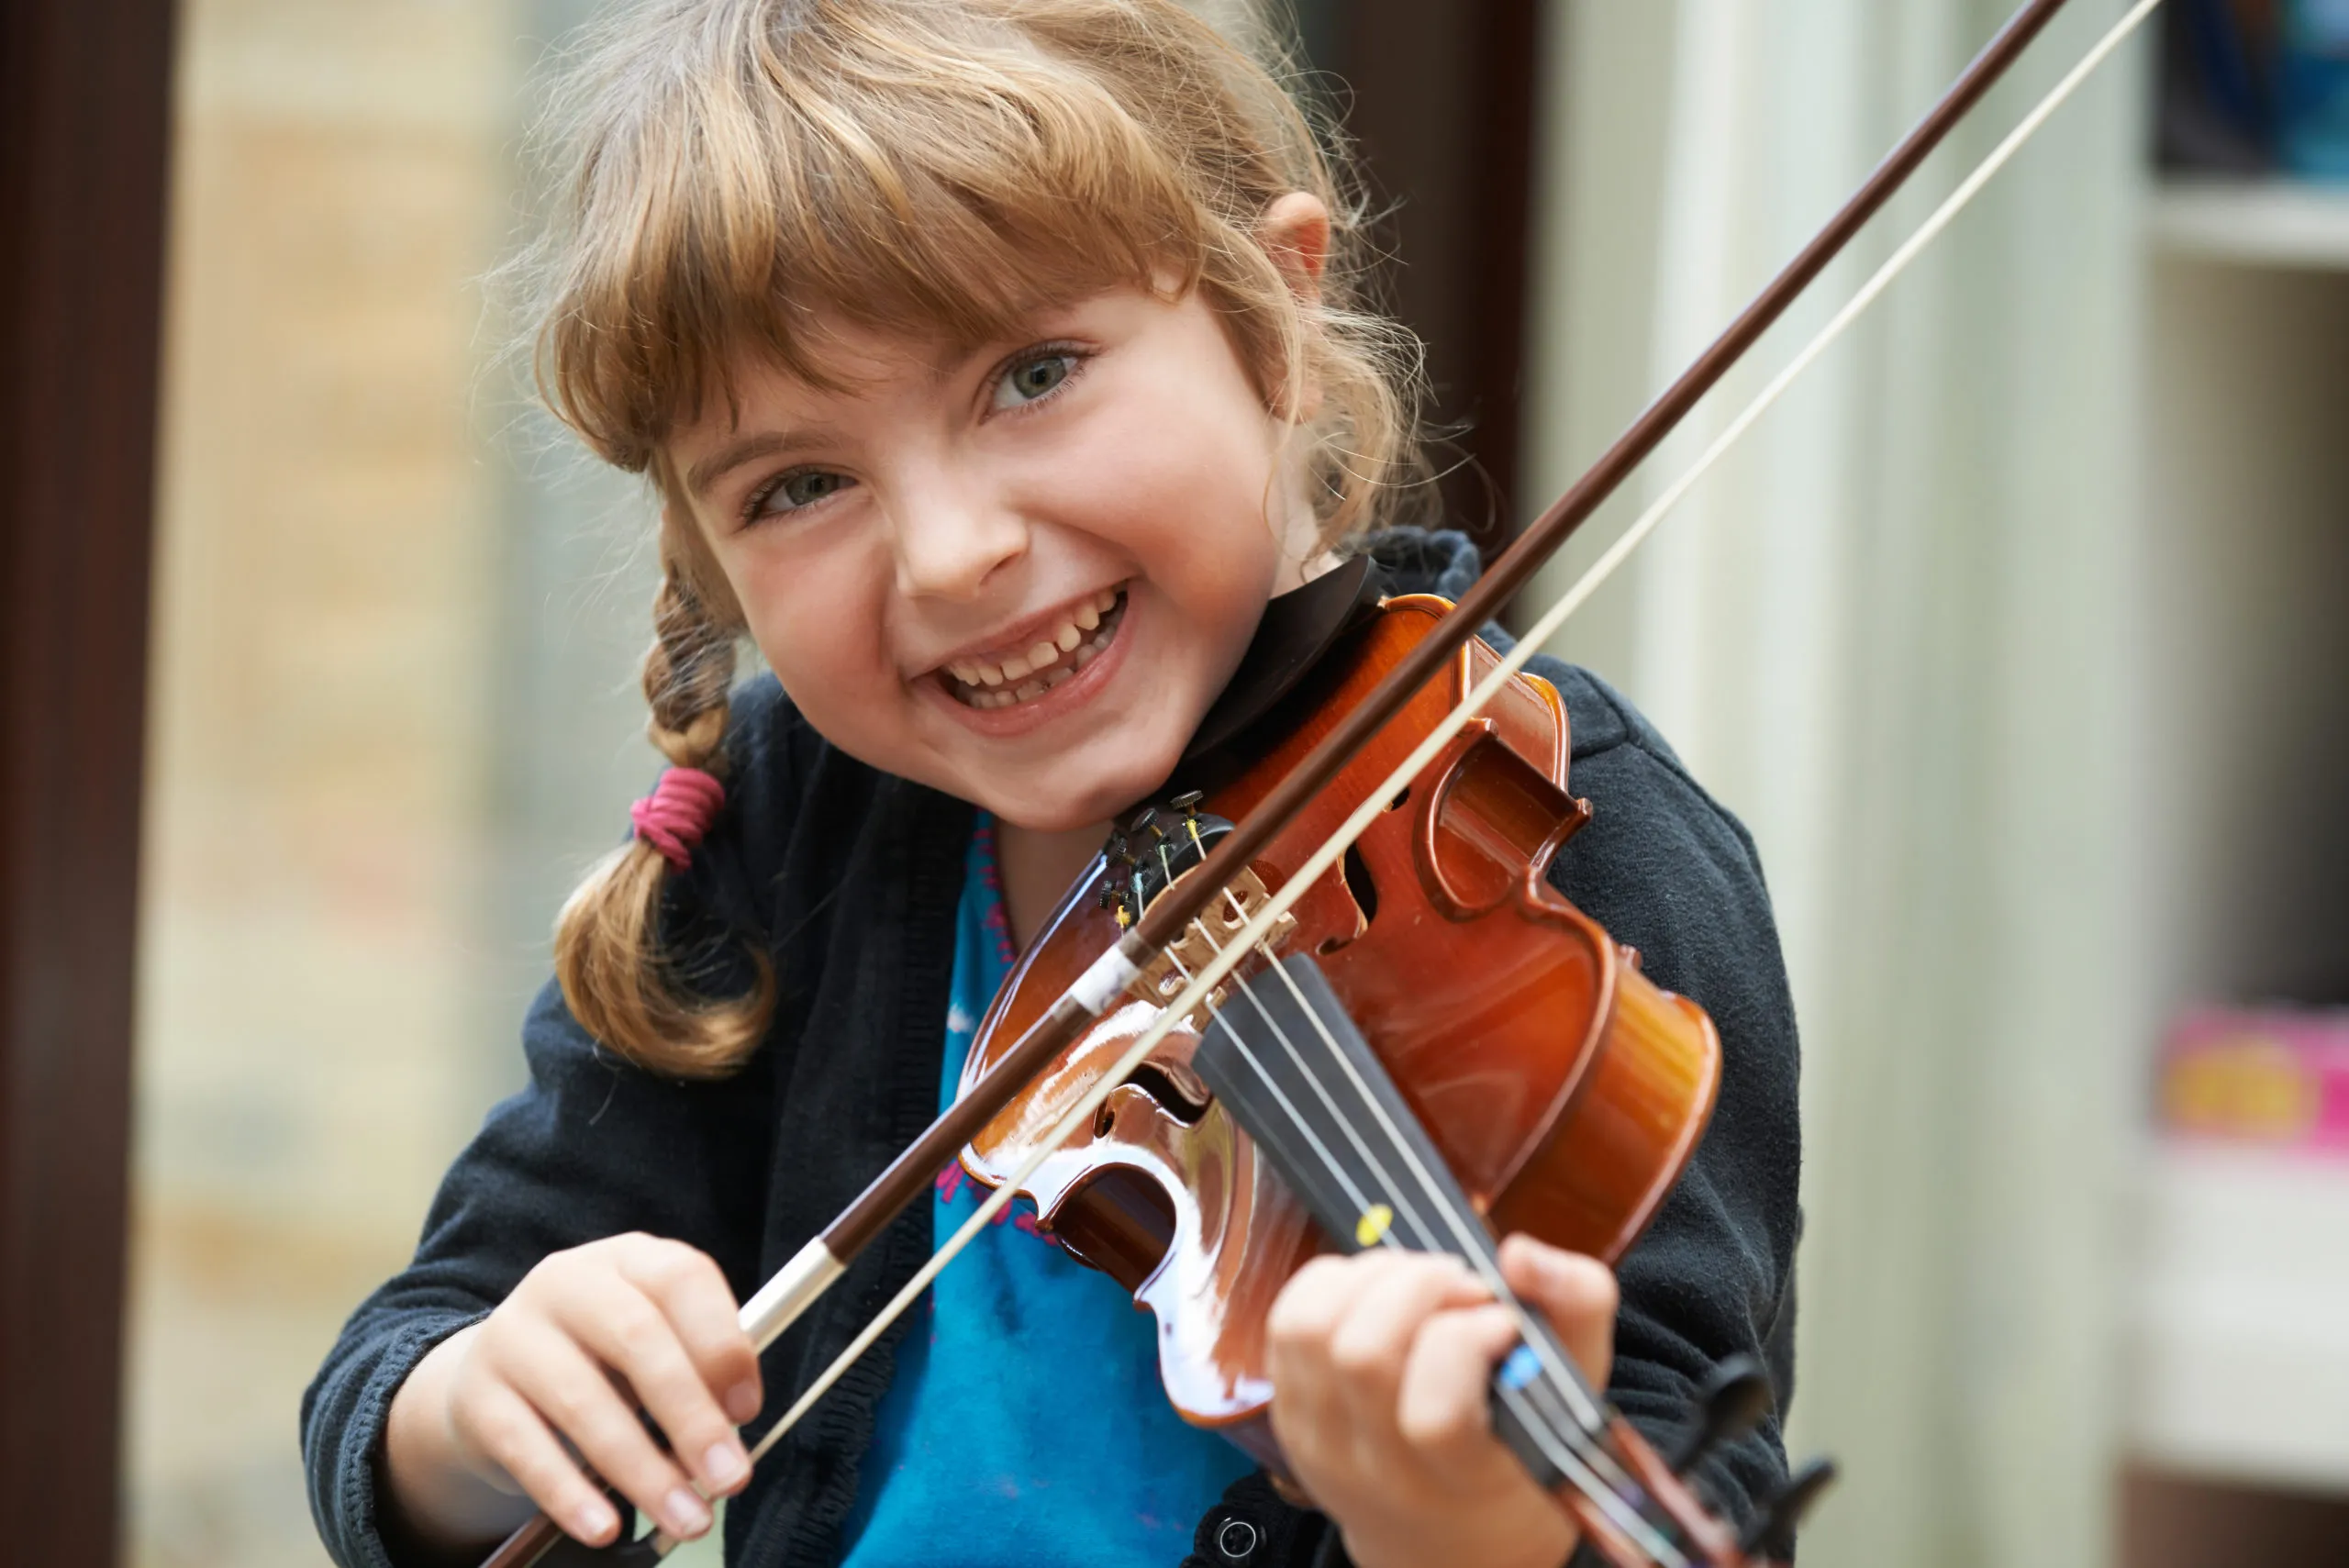 How to Motivate Your Child to Practice Their Instrument